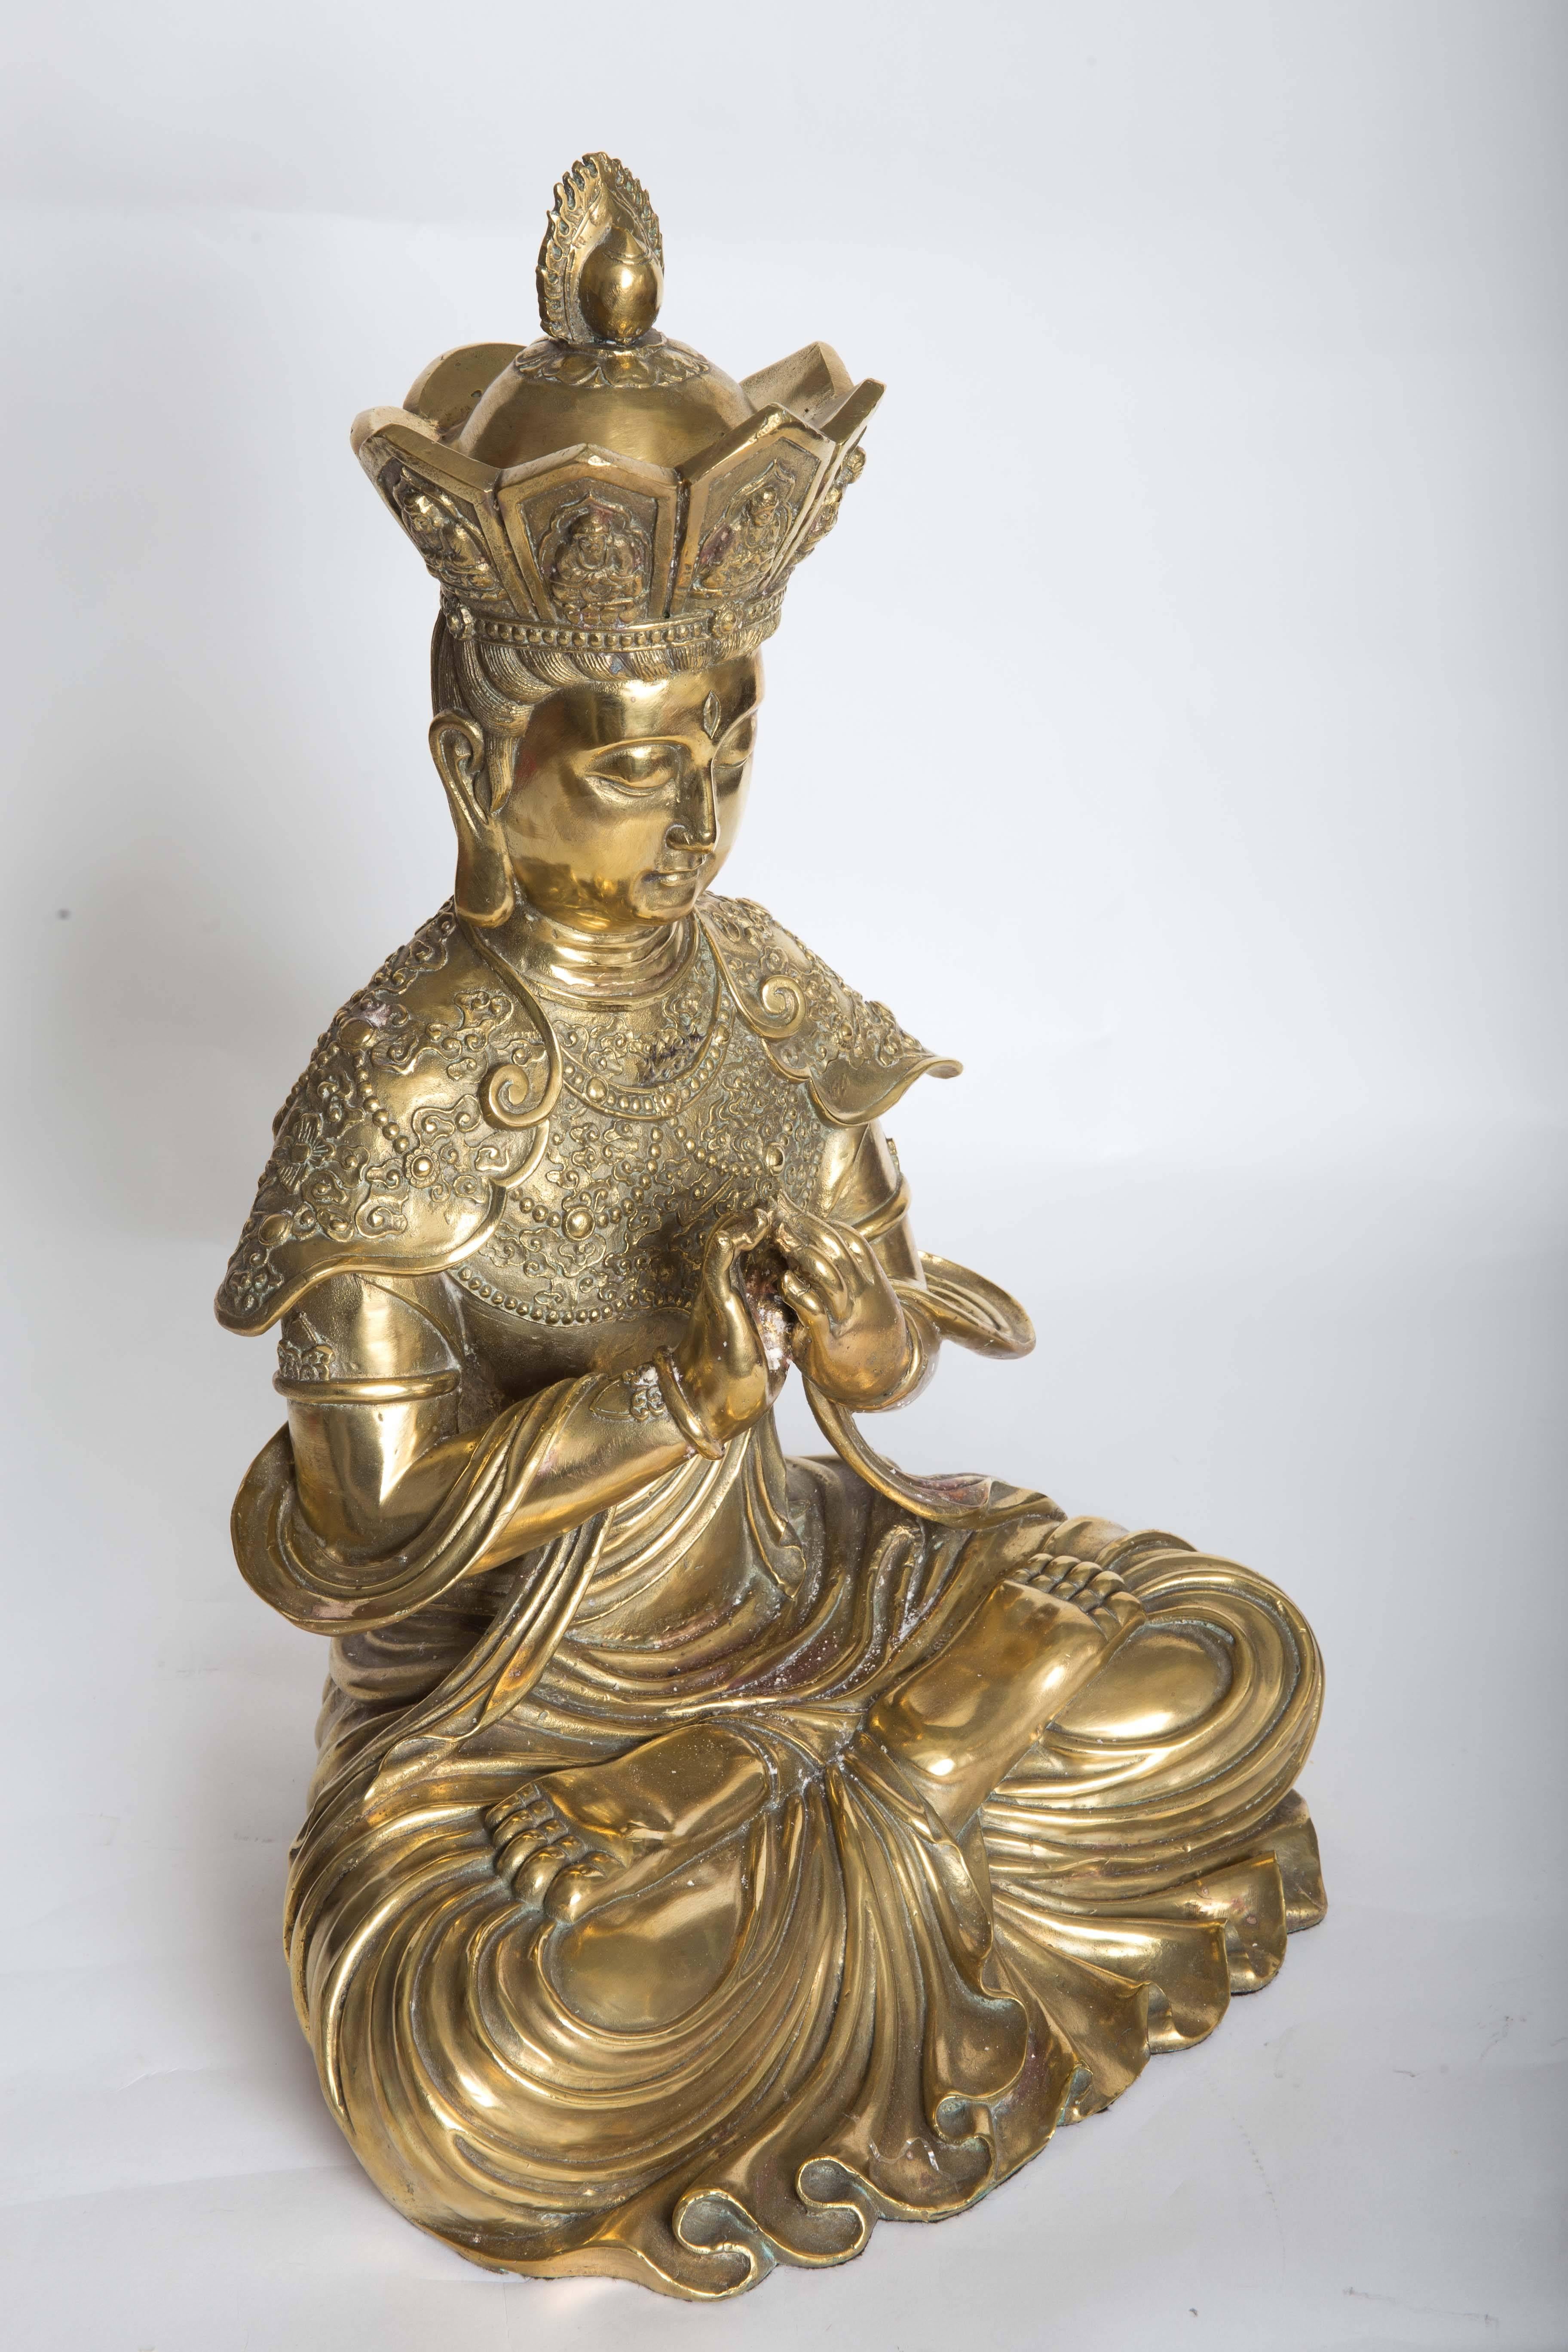 Intricately Etched Bronze Sculpture of a Seated Diety Figure 3